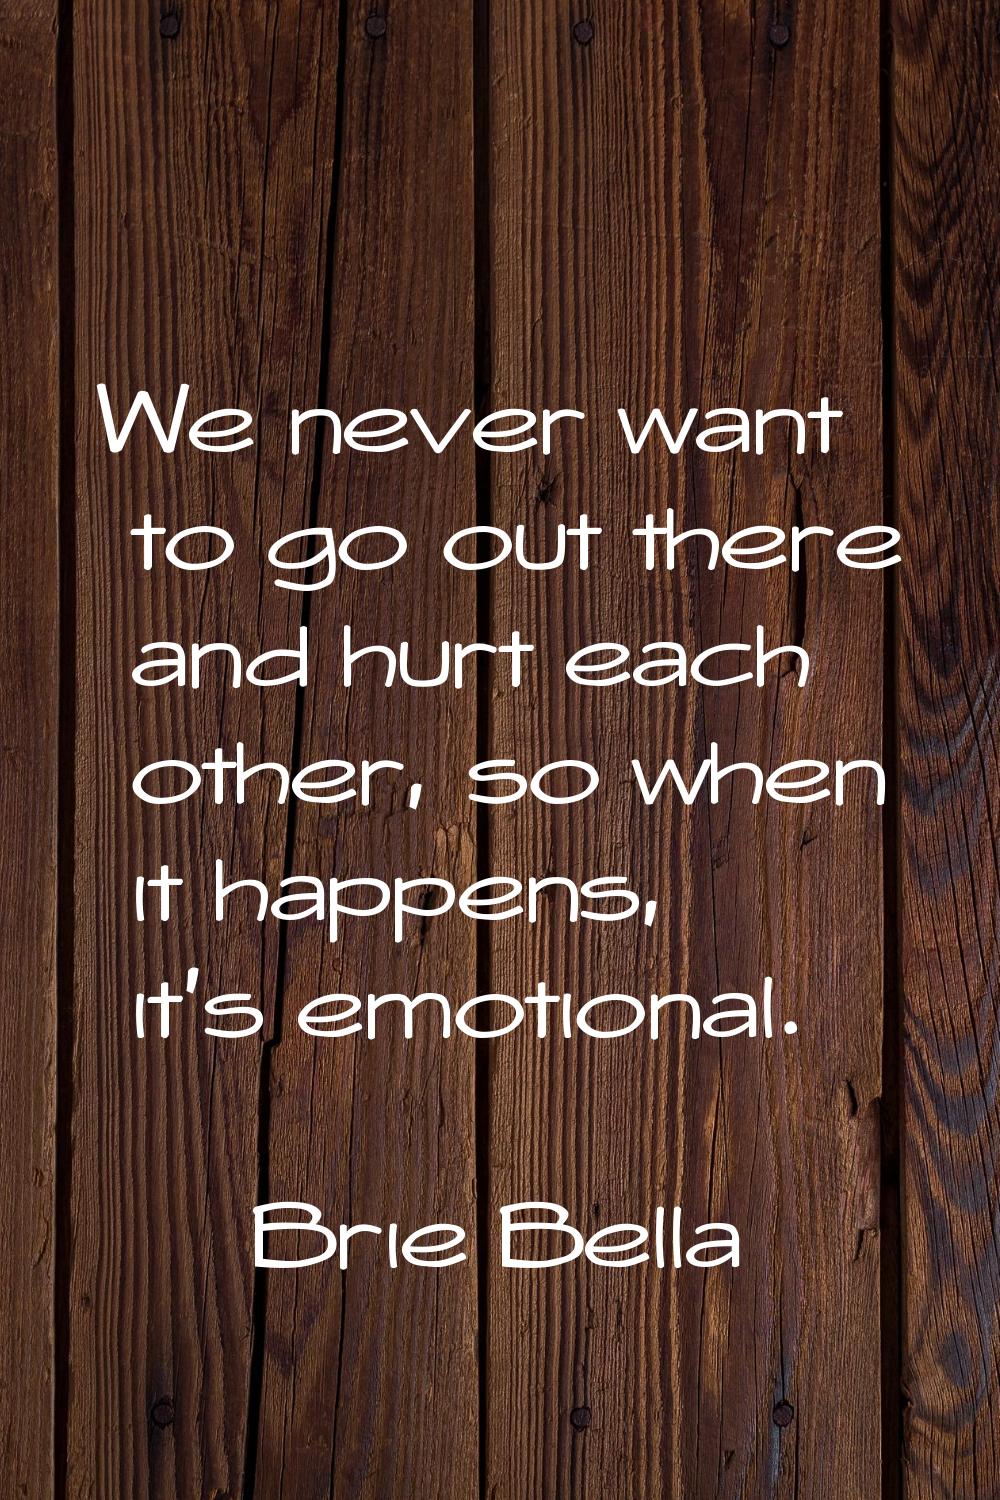 We never want to go out there and hurt each other, so when it happens, it's emotional.